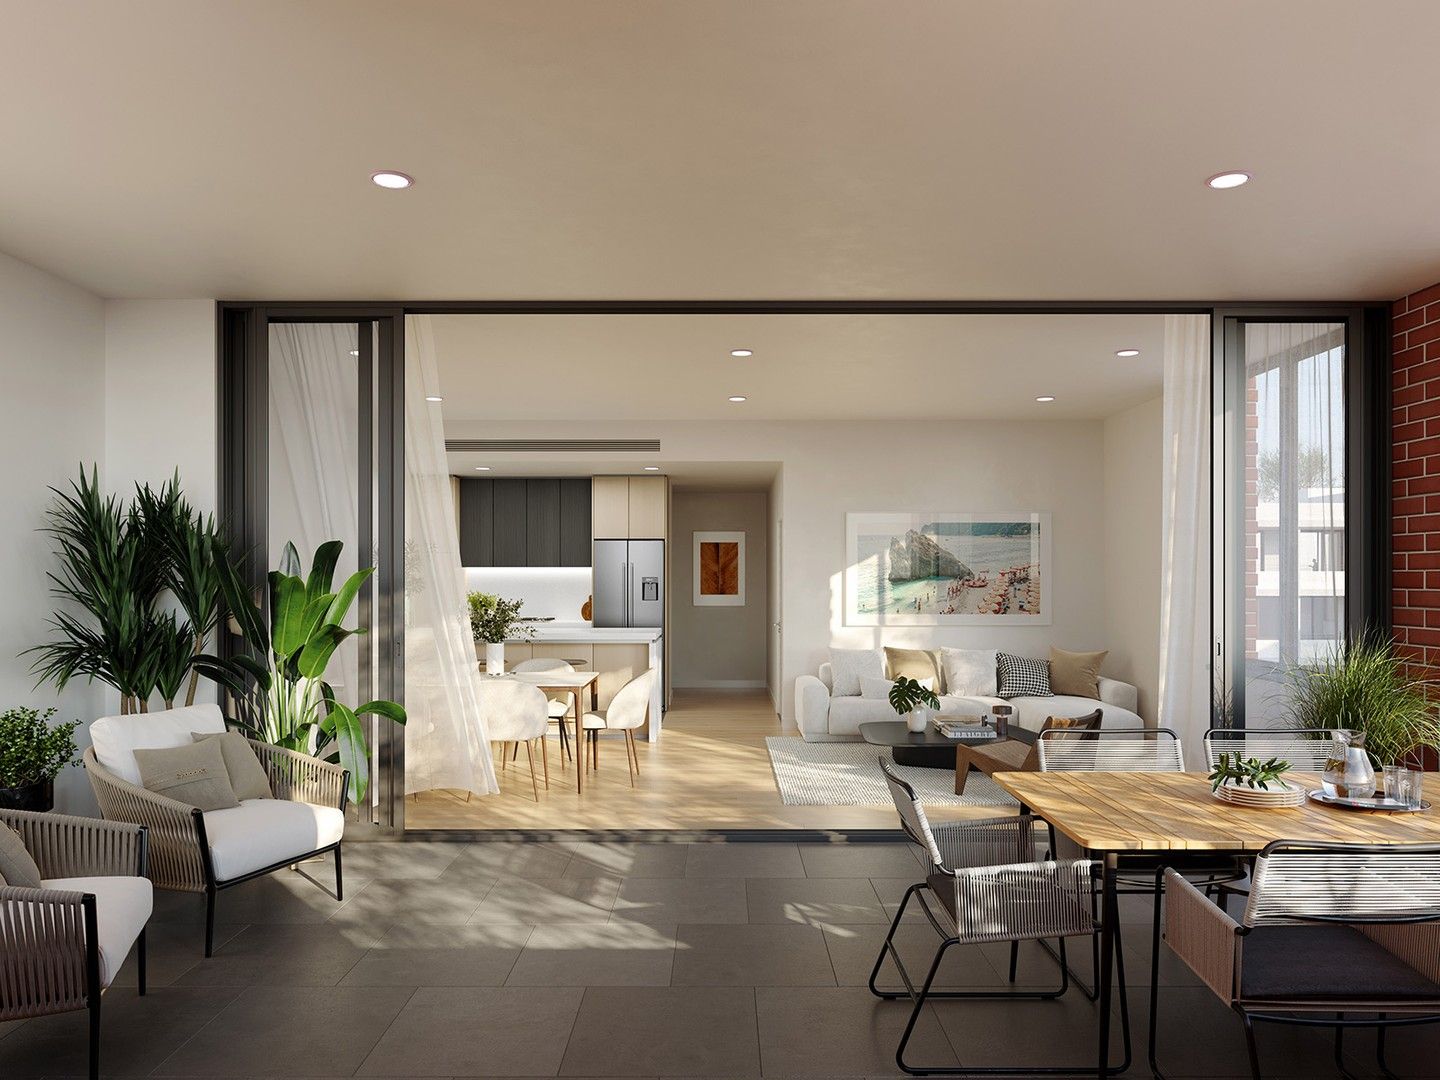 1 bedrooms New Apartments / Off the Plan in 2-12 & 1-15 Conferta Avenue ROUSE HILL NSW, 2155